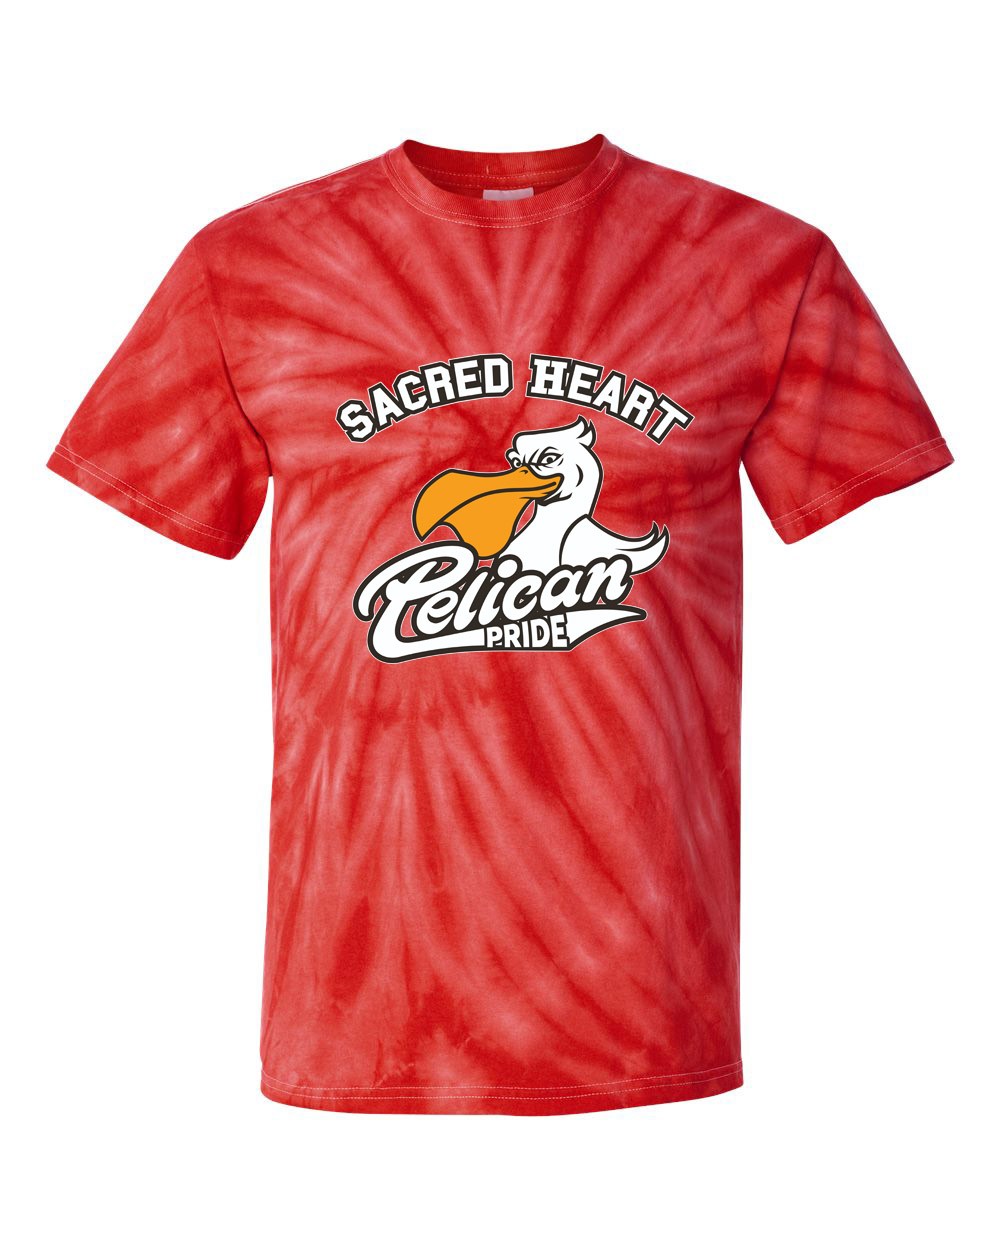 SHS Pelican Pride Spirit S/S Tie Dye T-Shirt w/ Logo - Please Allow 2-3 Weeks for Delivery